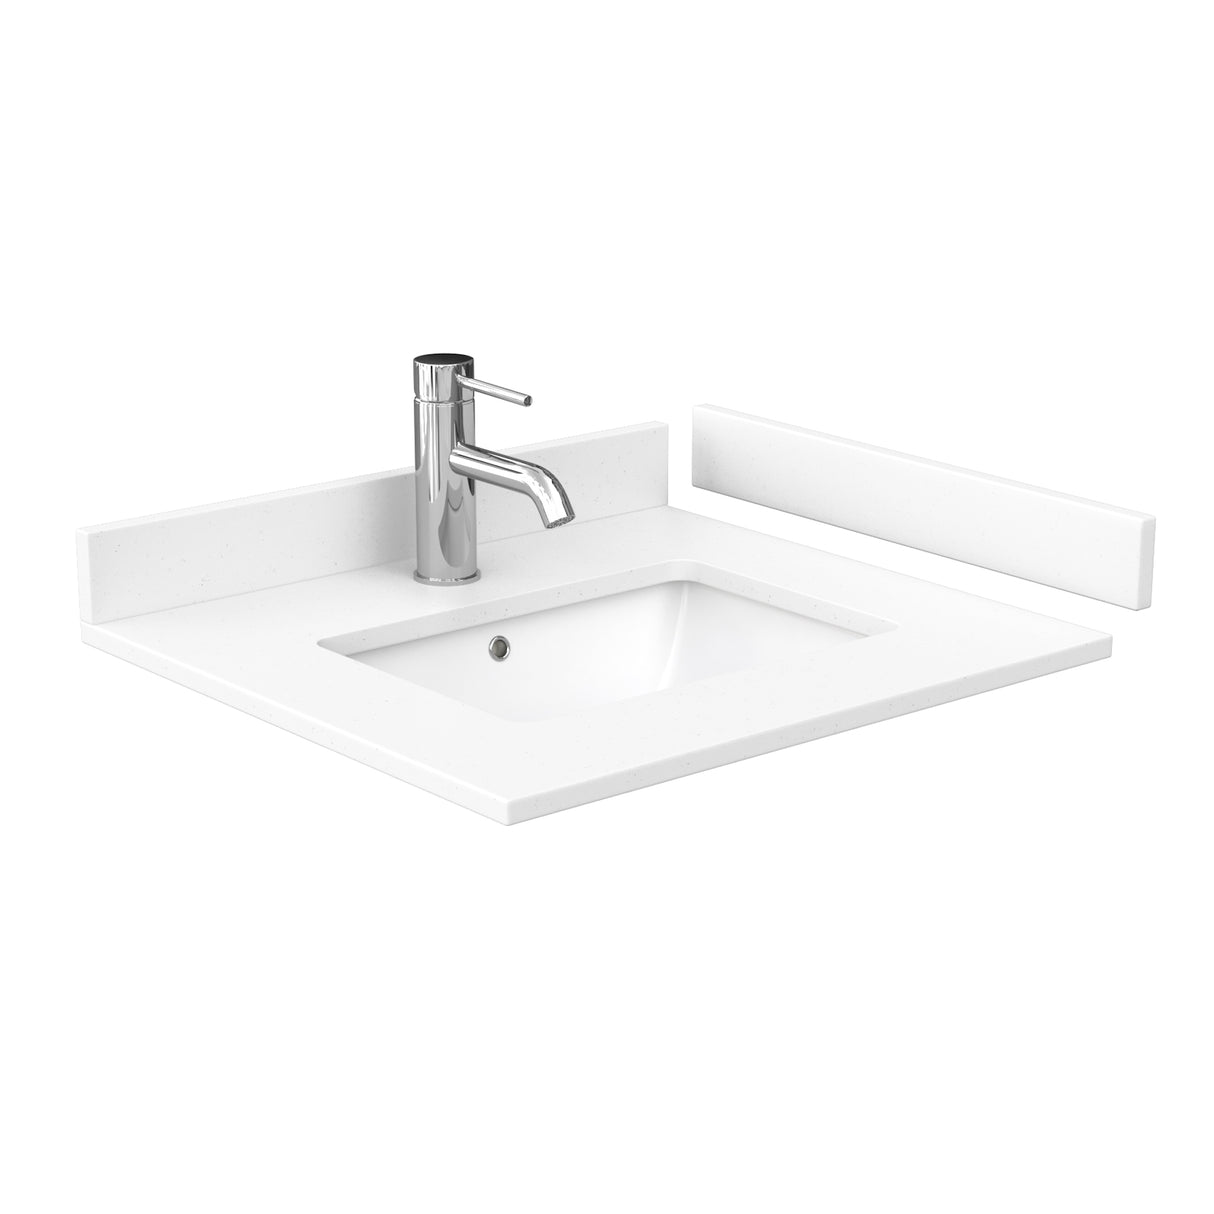 Beckett 24 Inch Single Bathroom Vanity in White White Cultured Marble Countertop Undermount Square Sink Brushed Gold Trim